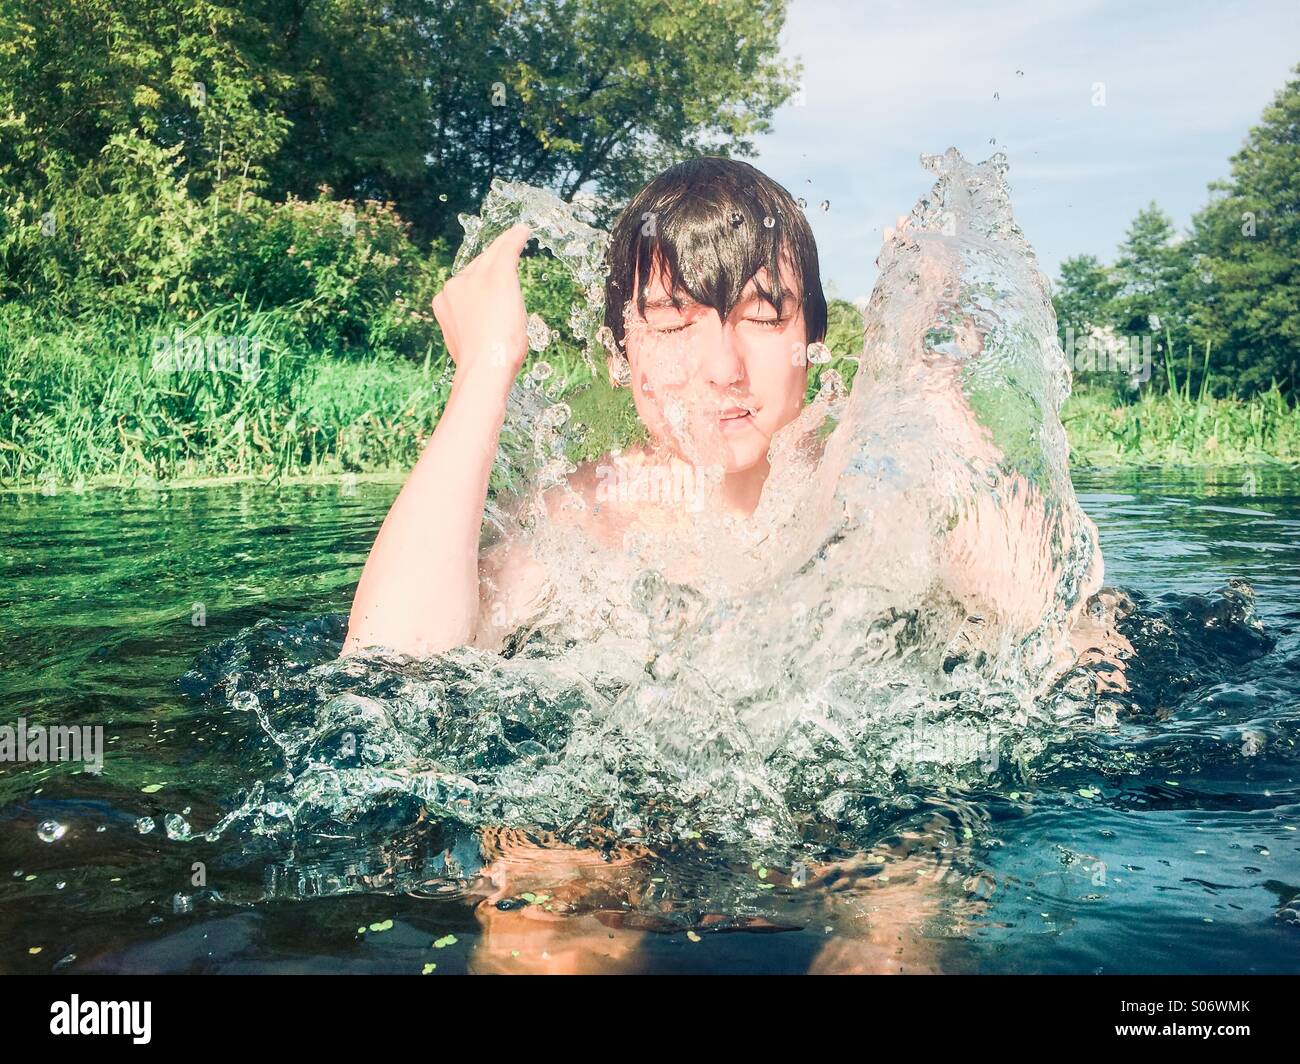 Boy splashing water on his face in a pure river Stock Photo